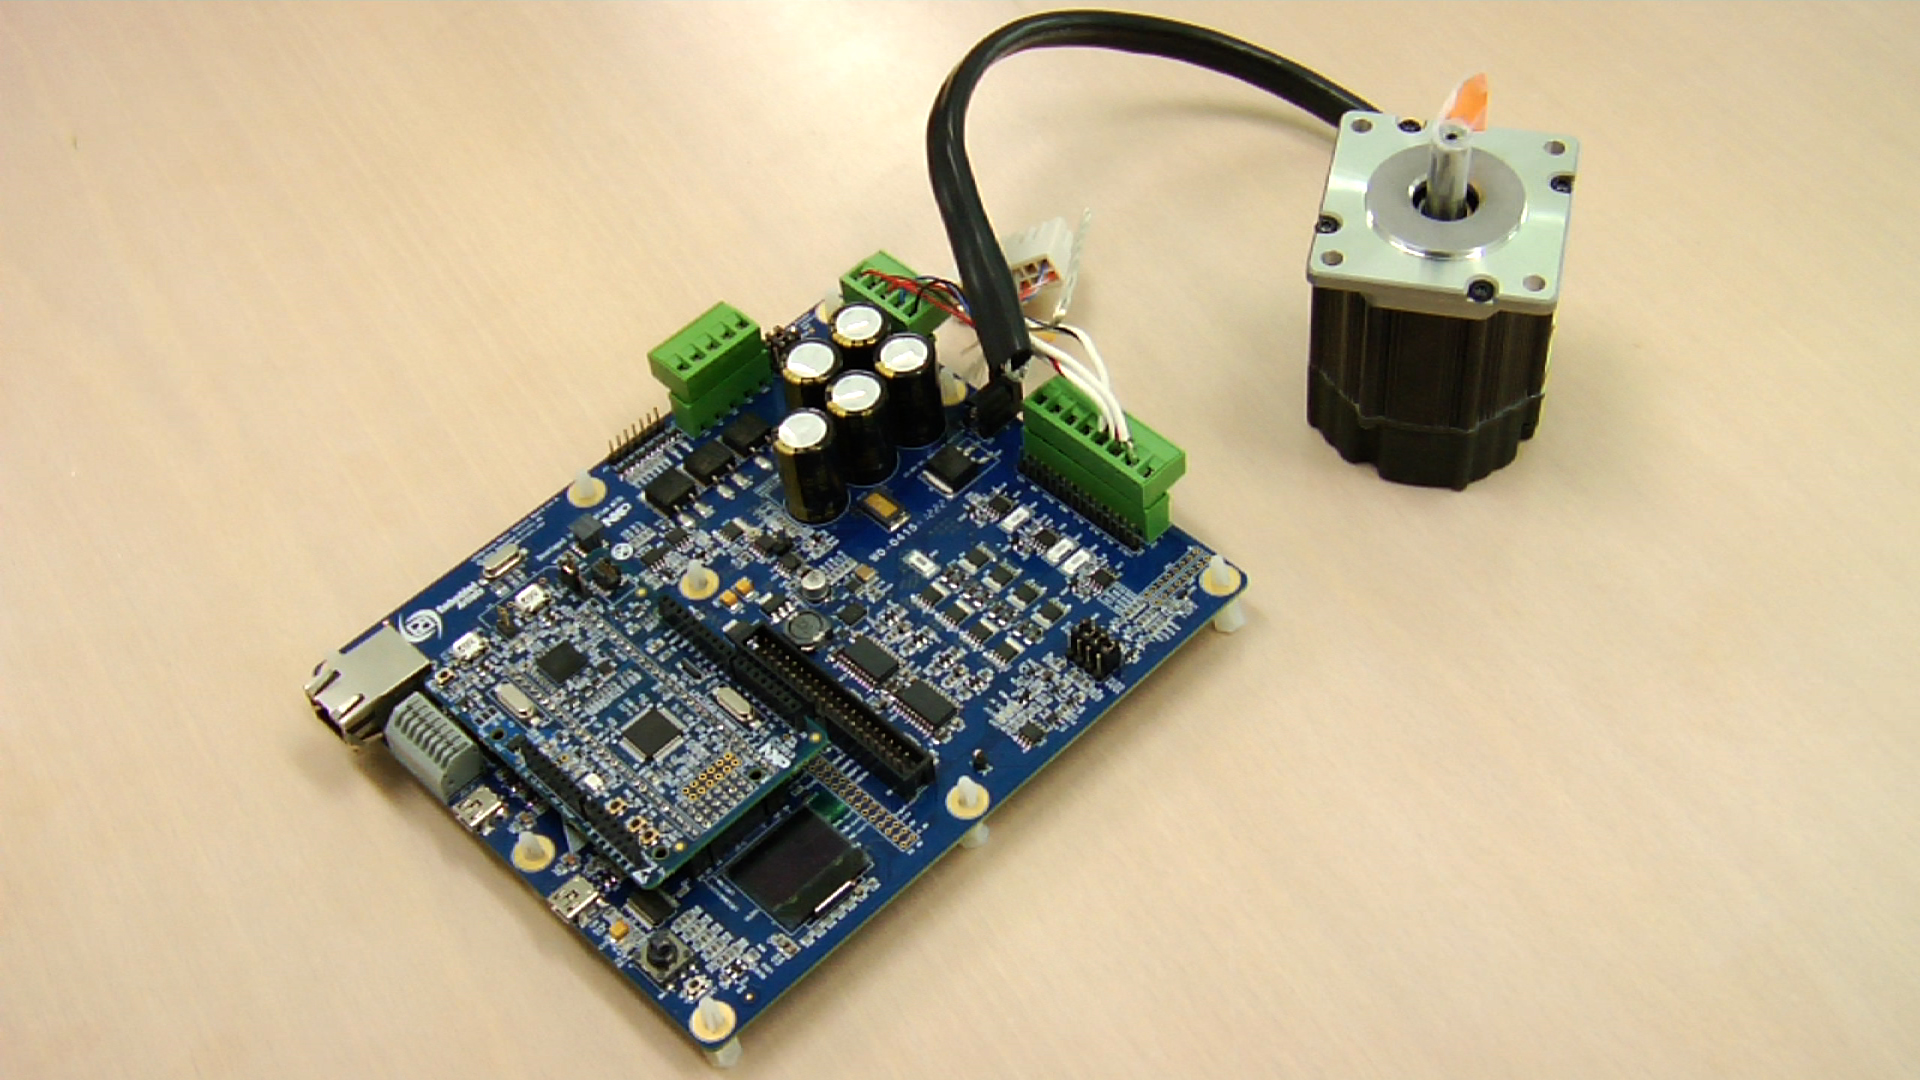 Figure 2 - Two motor control ‘solution boards’ based on the LCP1500 series are available from NXP, which include baseboards, motor and free firmware.